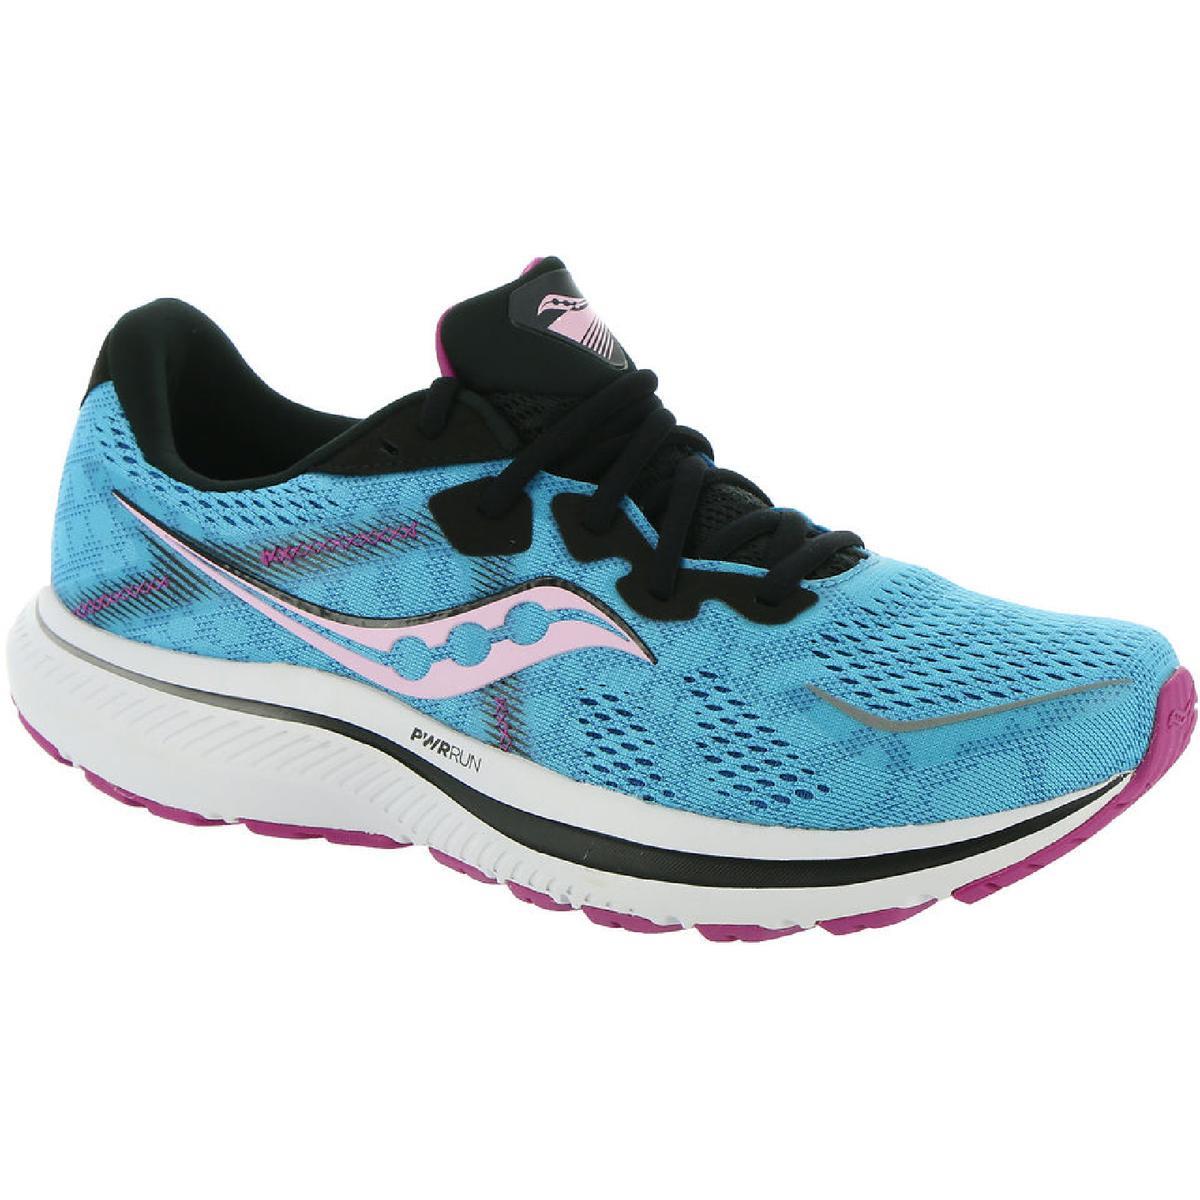 Saucony Womens Omni 20 Fitness Lace Up Gym Running Shoes Sneakers Bhfo 9445 Blue Blaze/Razzle